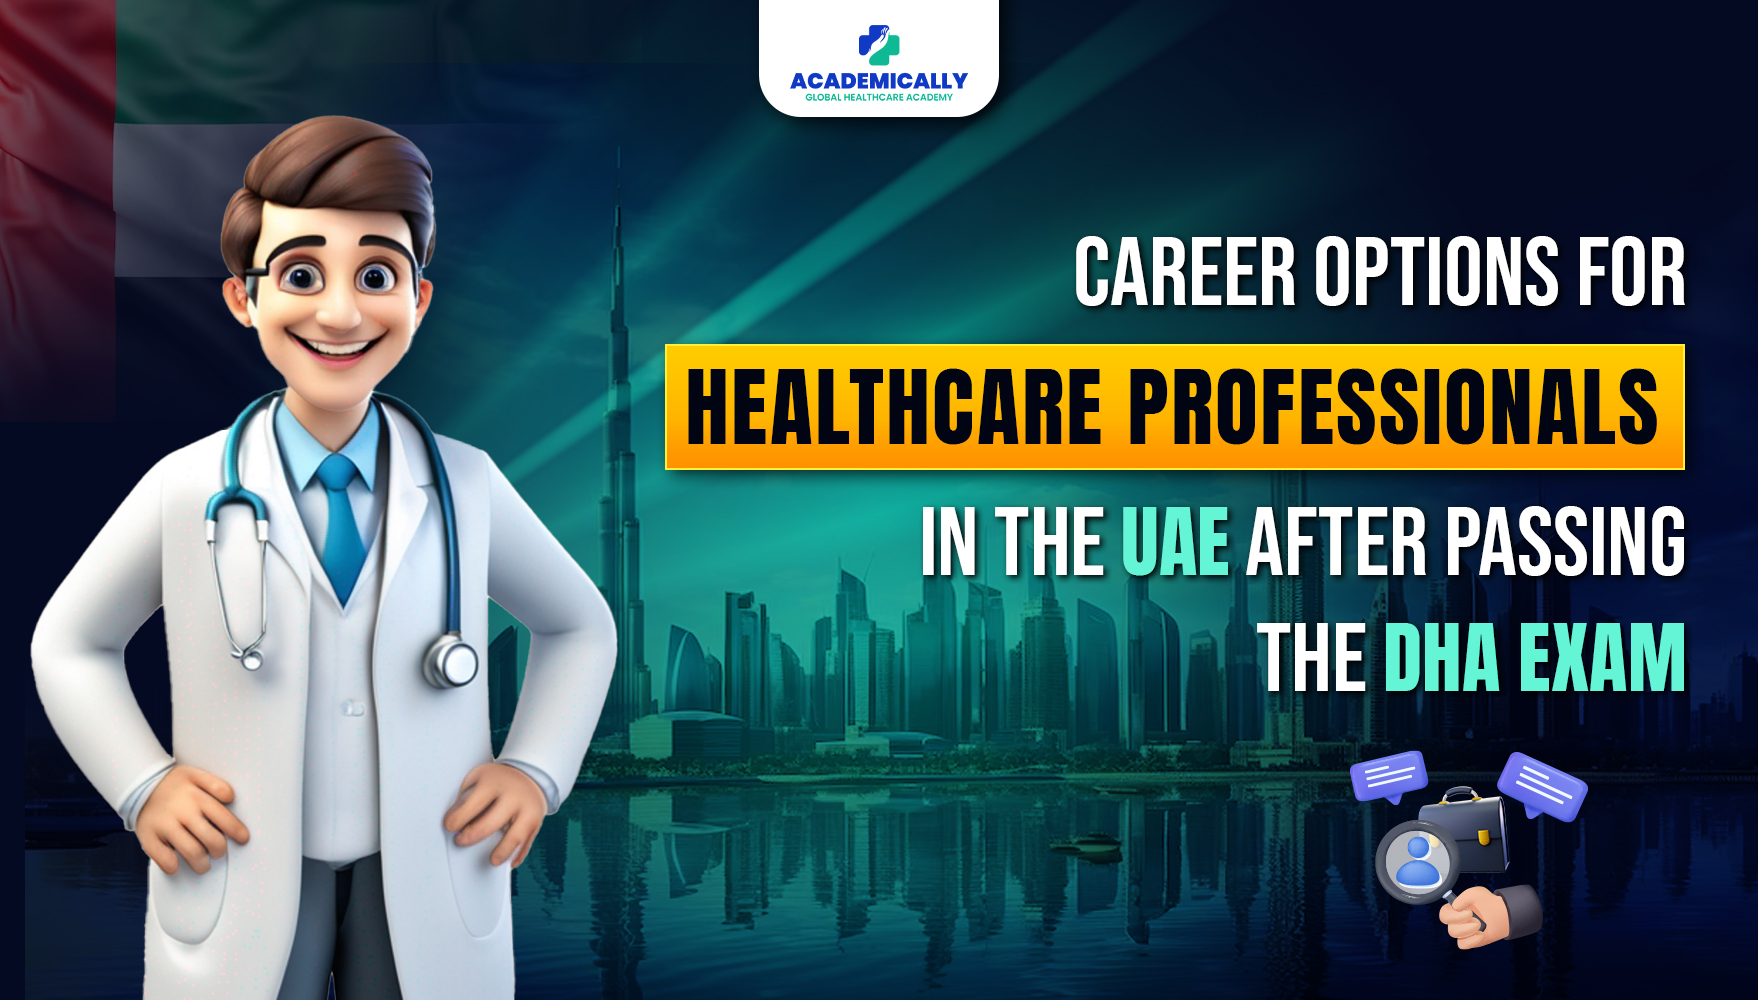 Career Options for Healthcare Professionals in UAE